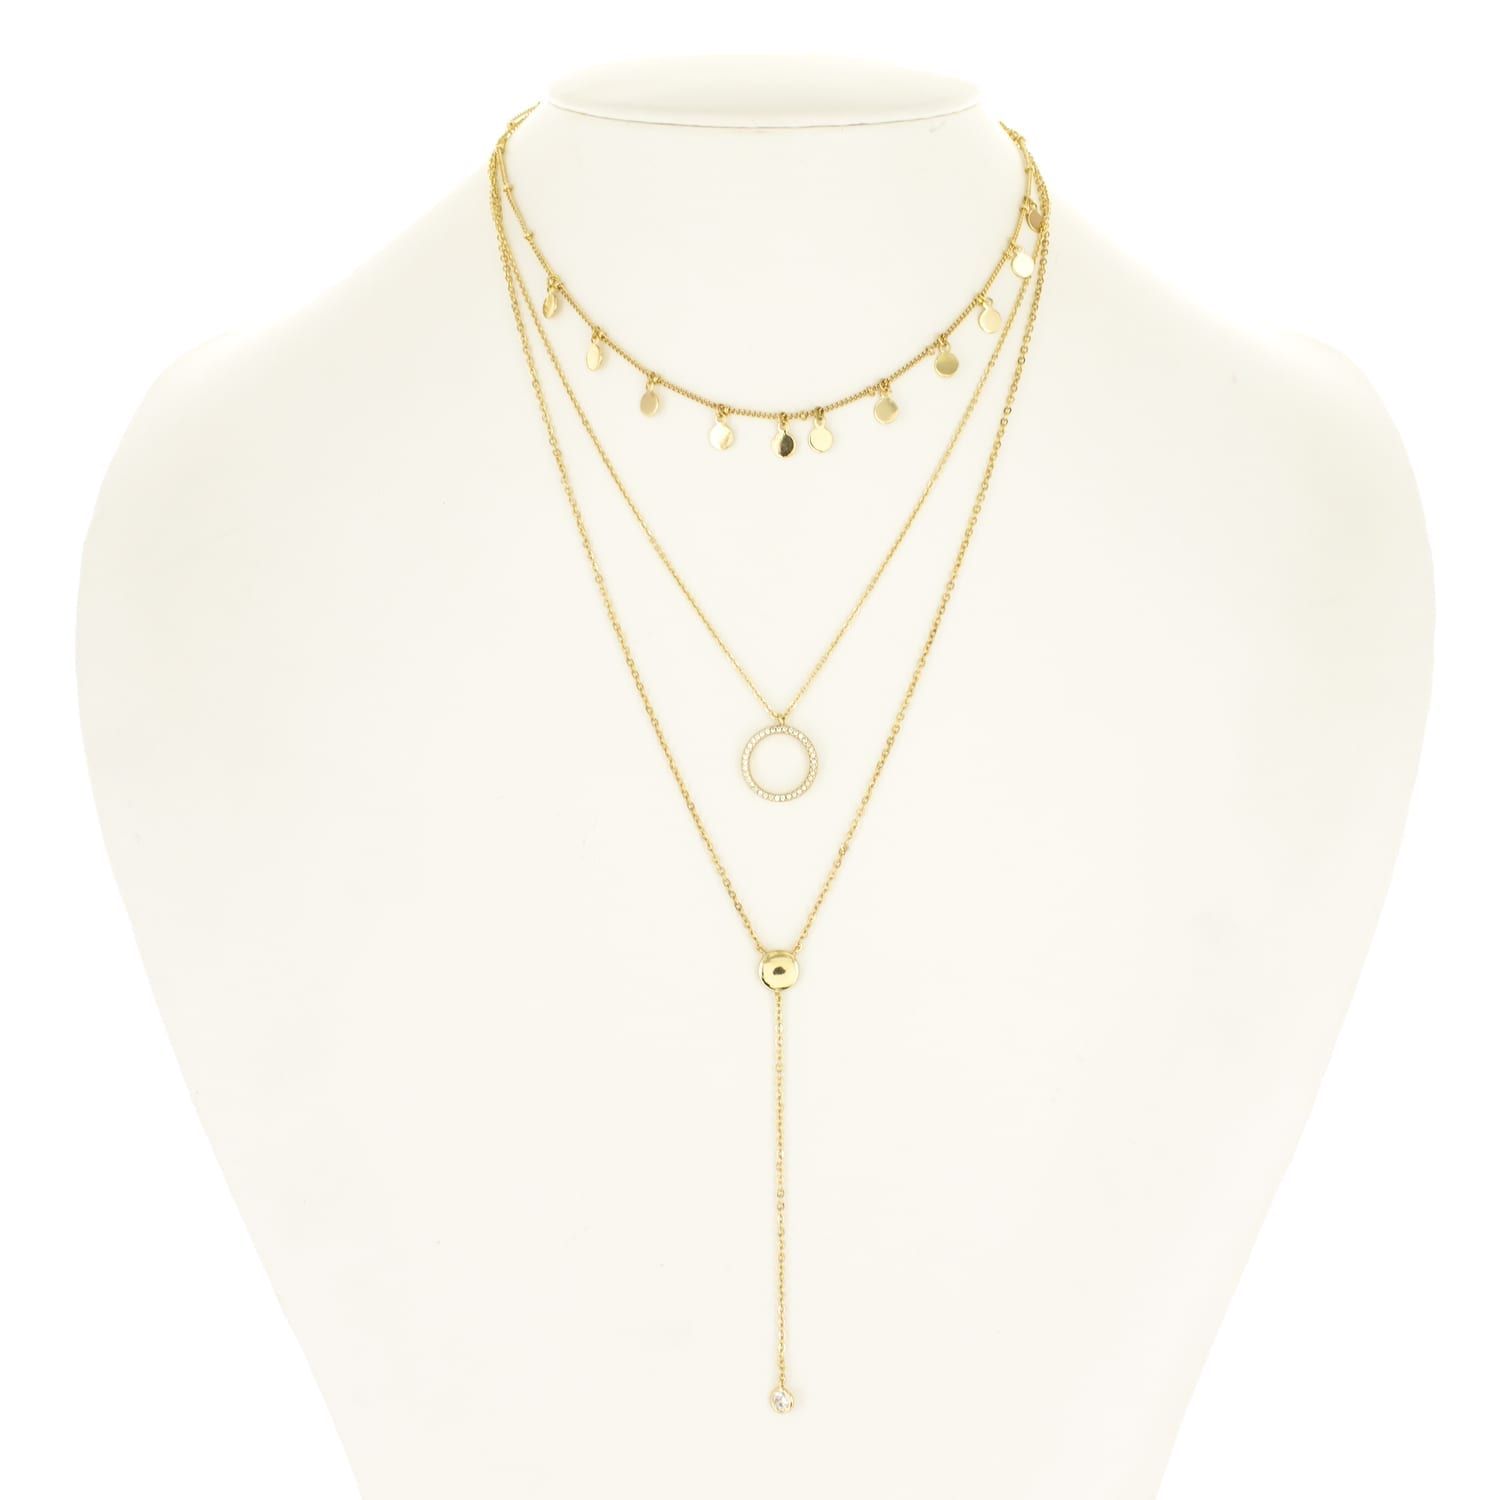 GOLD DISKS AND CIRCLE LAYERED Y-NECKLACE - Panacea Jewelry | Panacea